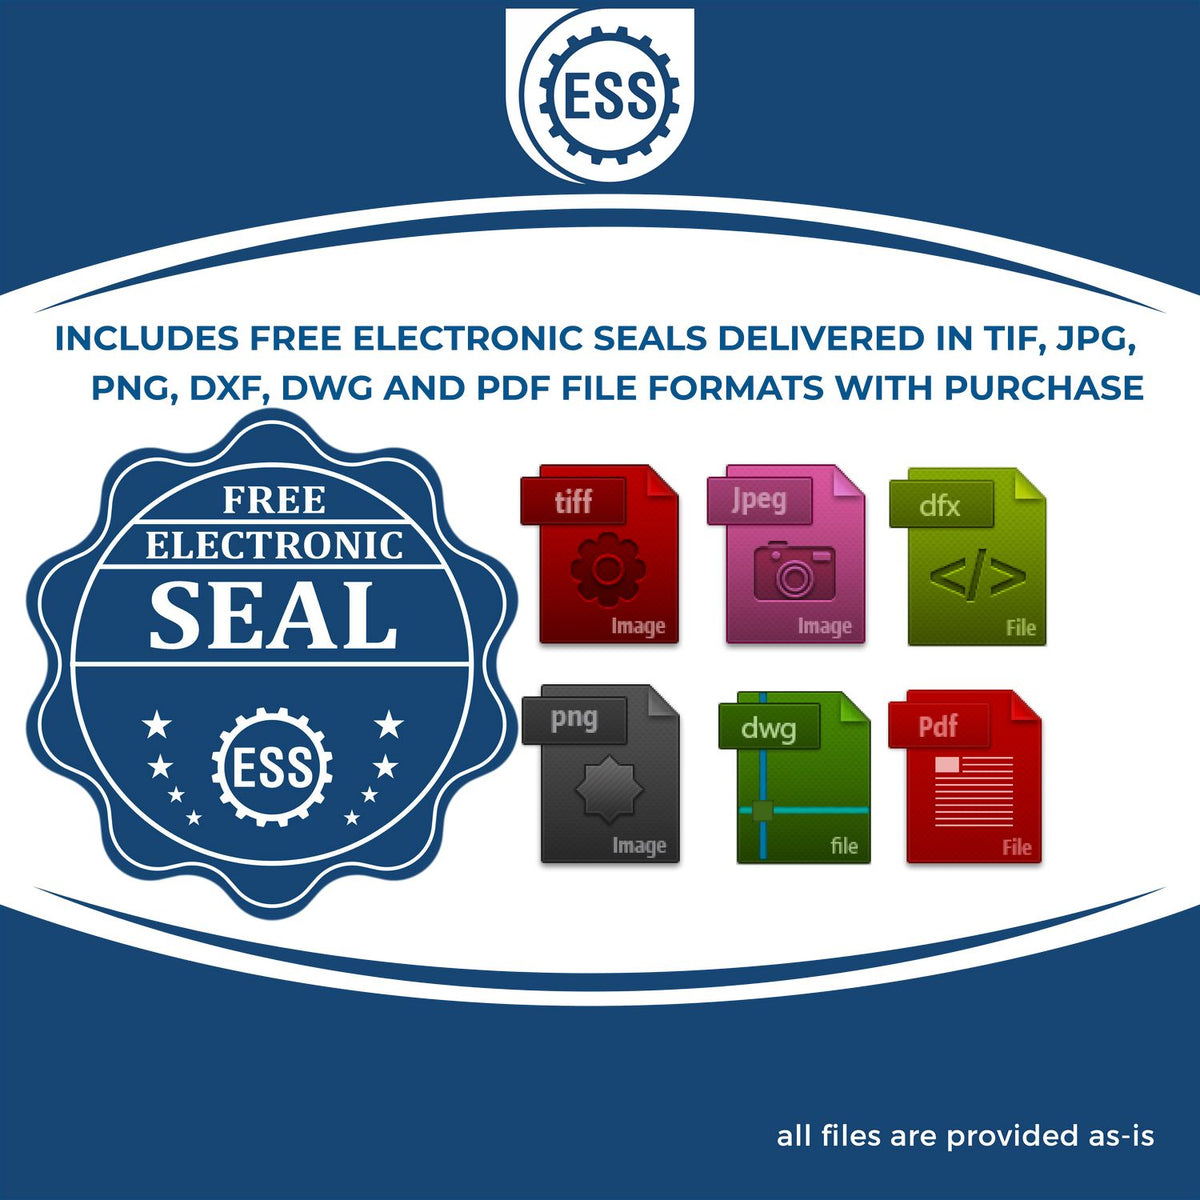 An infographic for the free electronic seal for the Vermont Professional Geologist Seal Stamp illustrating the different file type icons such as DXF, DWG, TIF, JPG and PNG.